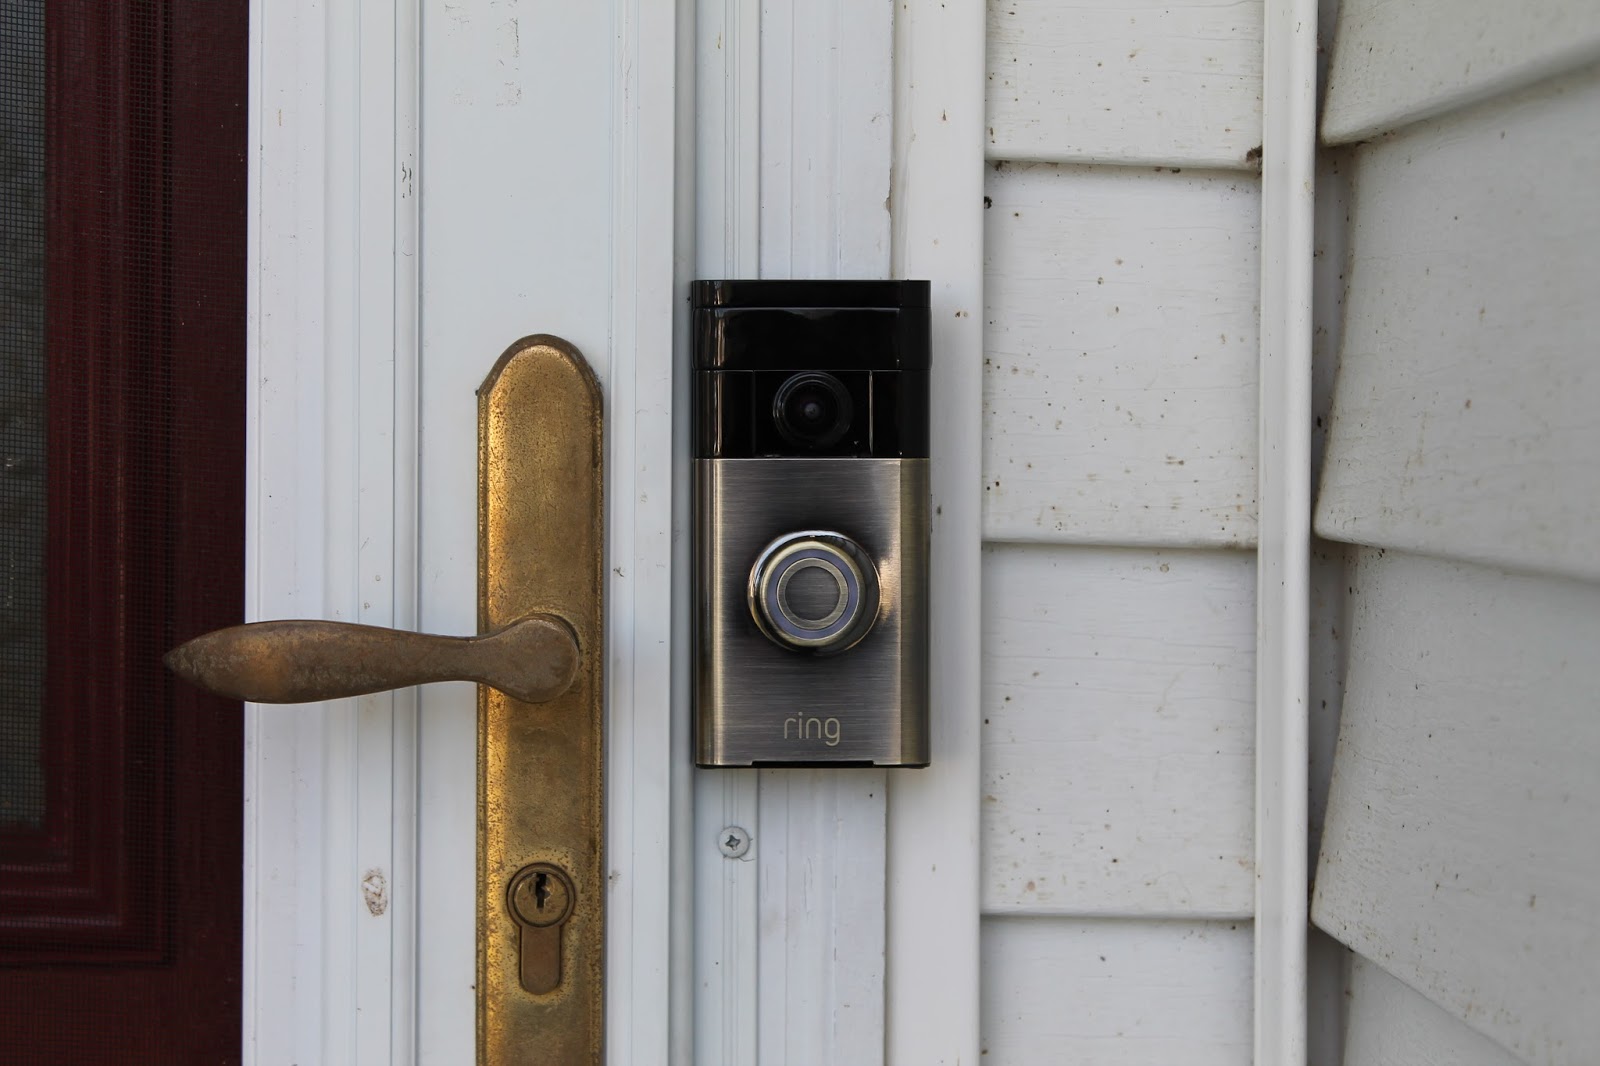 The RING Video Doorbell See who's knocking! Simple